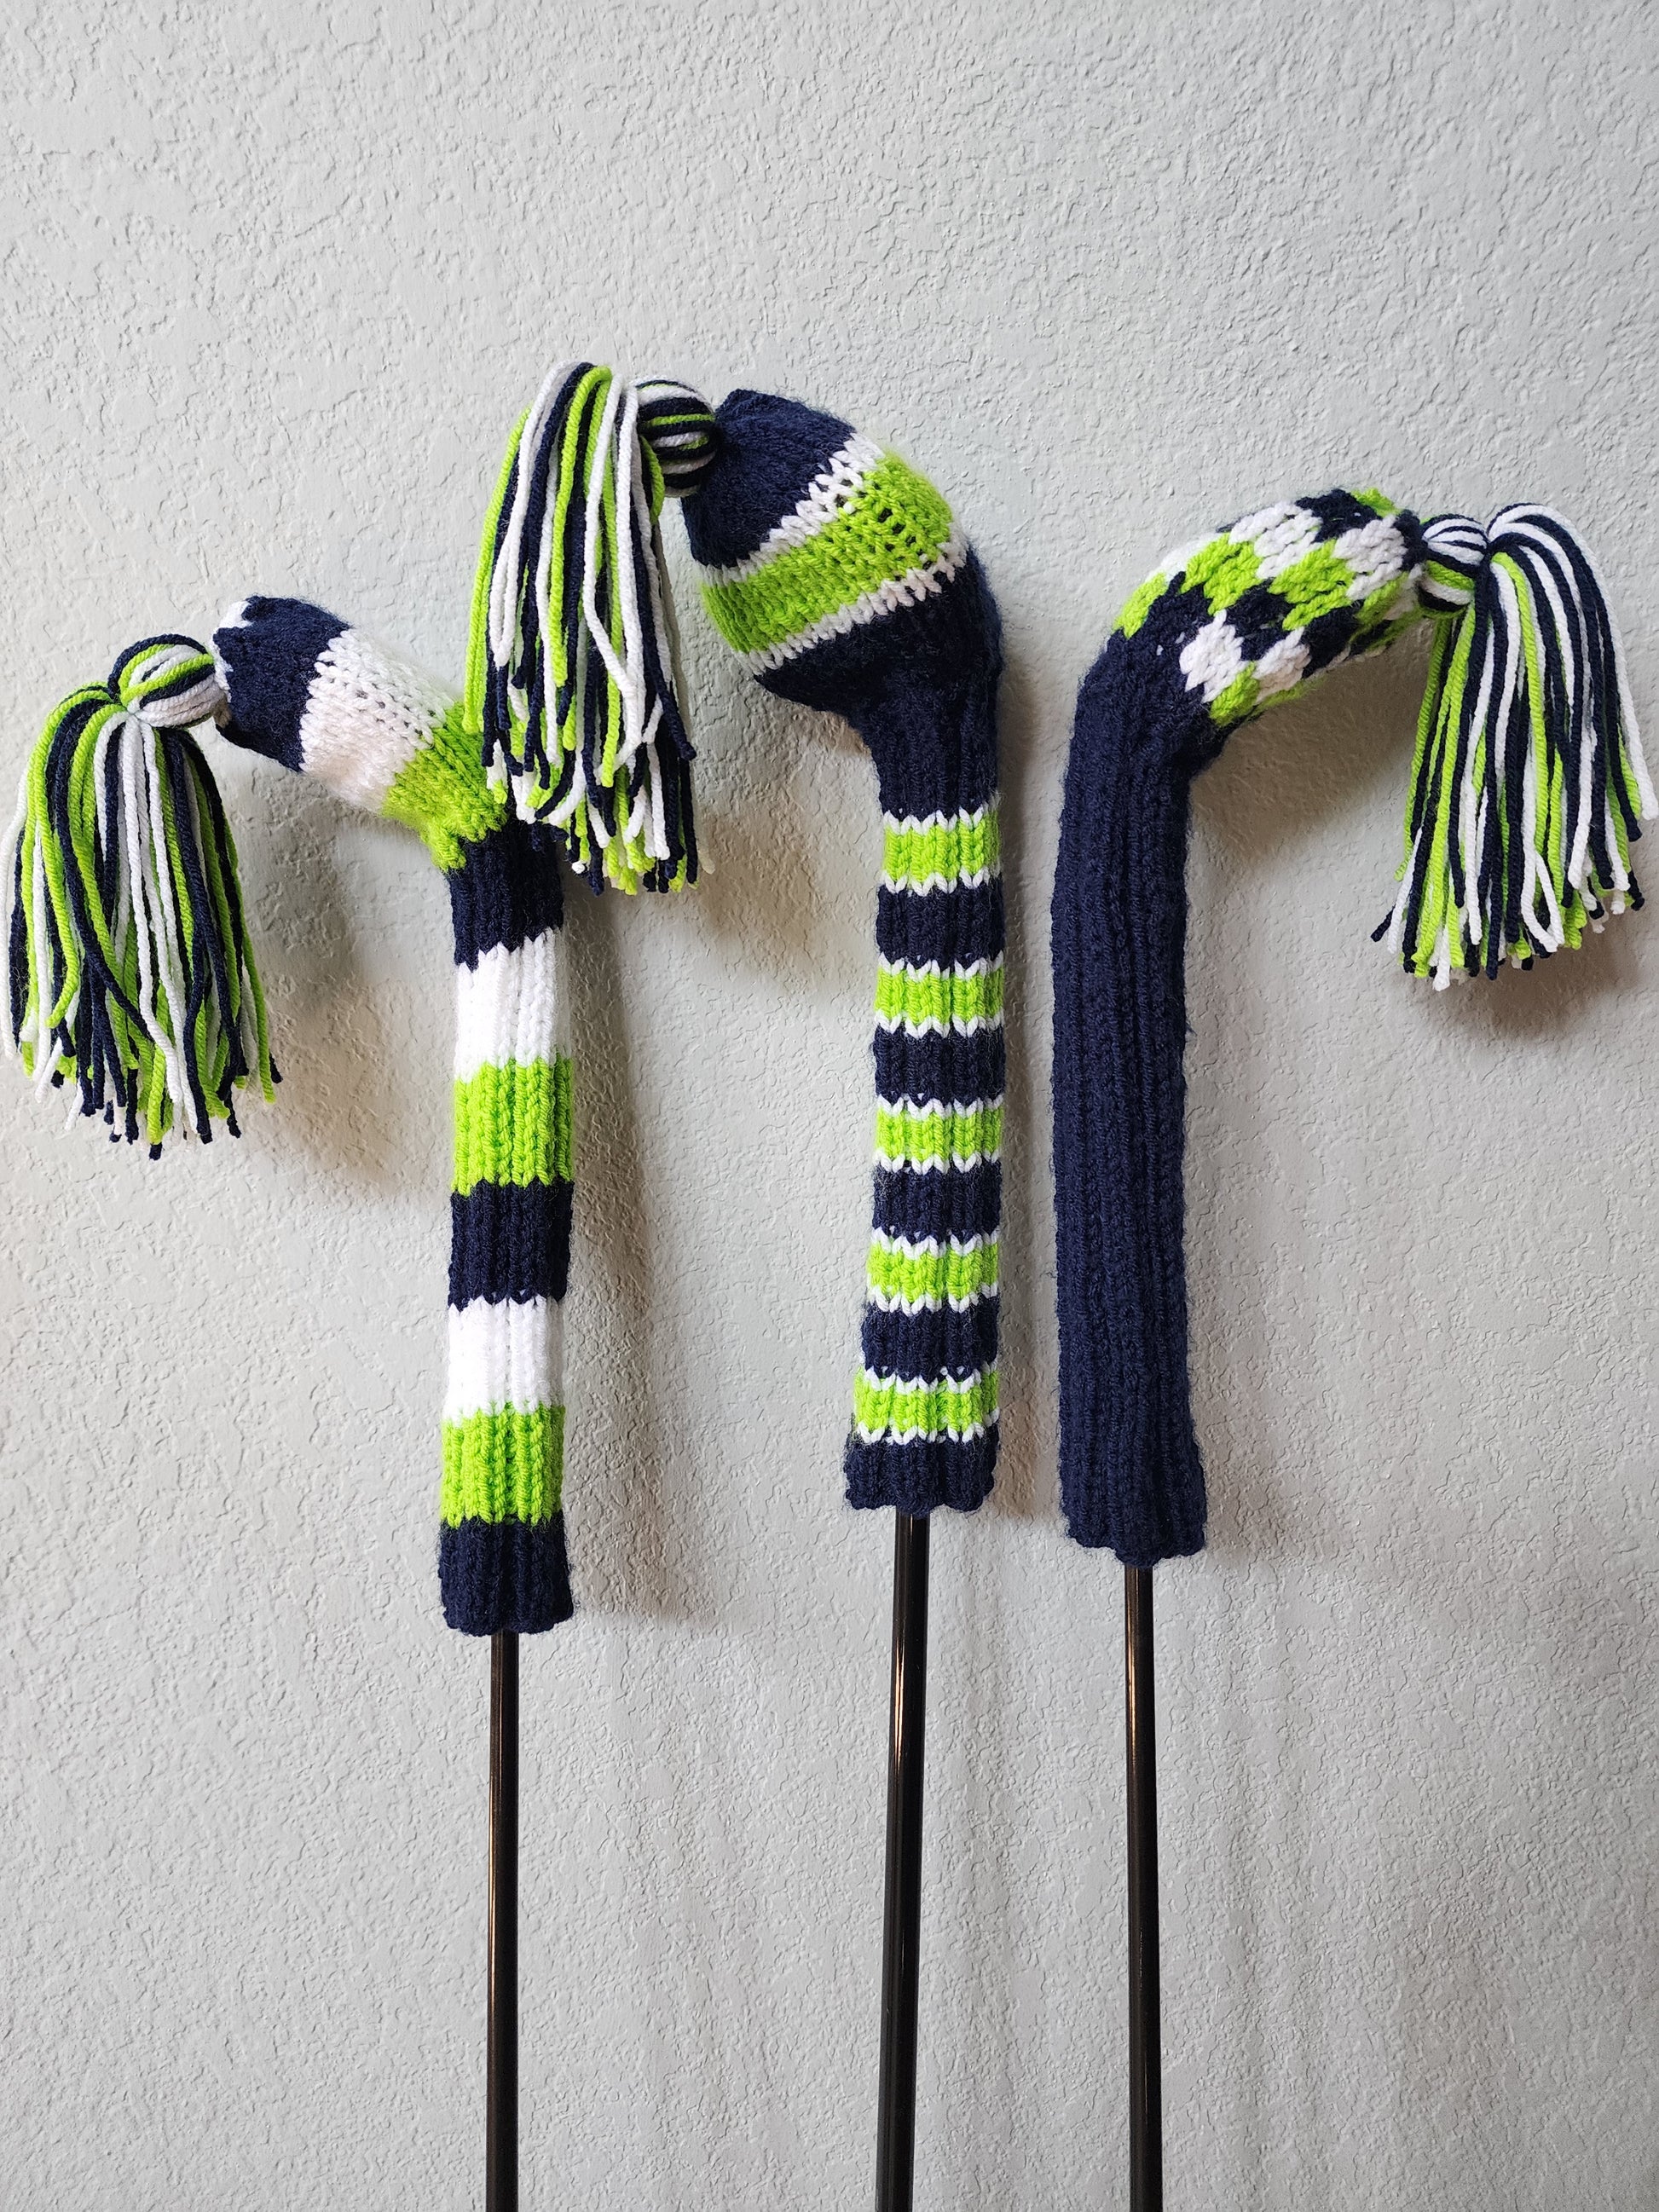 Hand Knit Golf Club Head Covers Retro-Vintage Navy, Lime Green & White with Tassels for Driver & Fairway Woods - Austinknittylimits